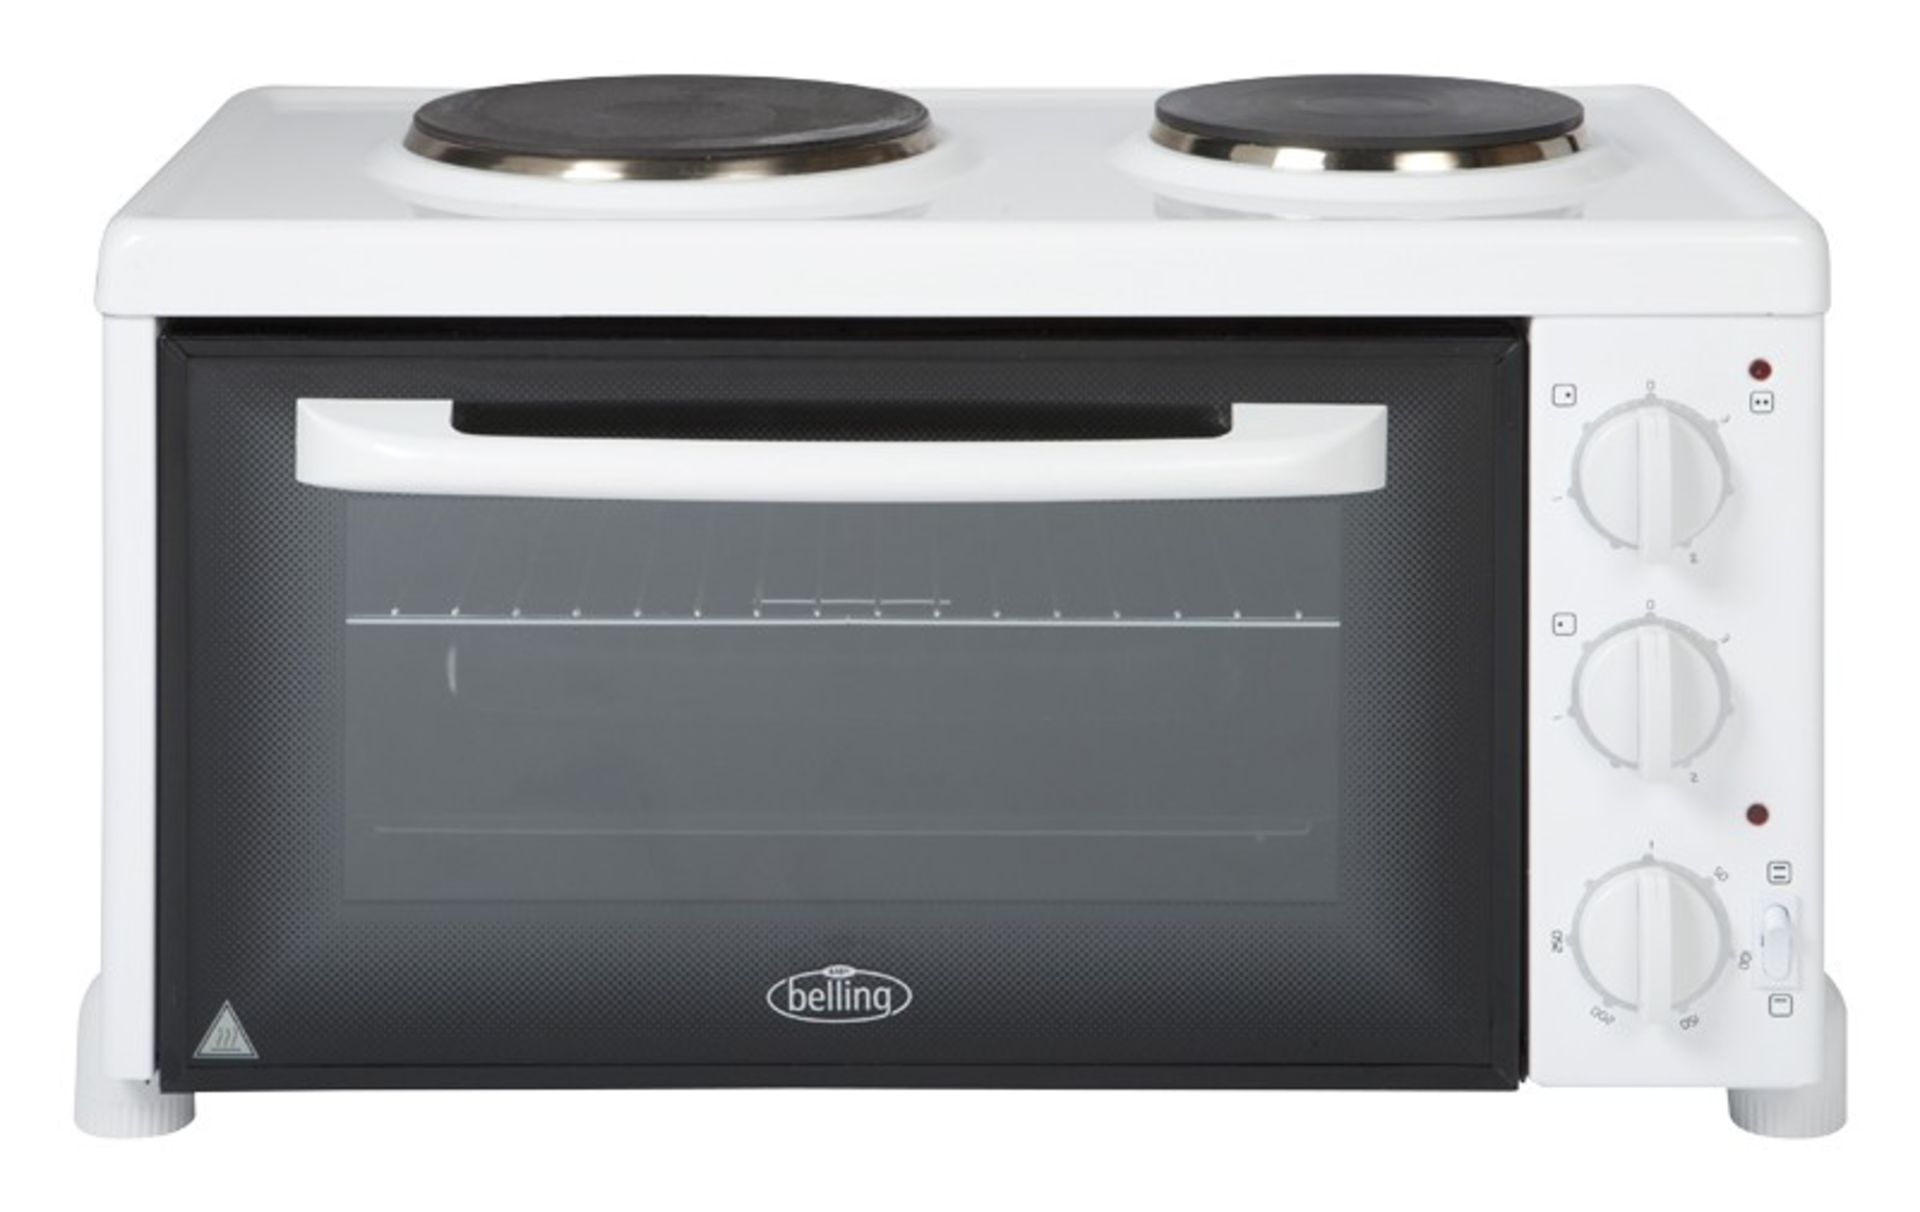 1 x BOXED BELLING MK318 MINI OVEN WITH HOB (42300) RRP £180 (18.3.16) *PLEASE NOTE THAT THE BID